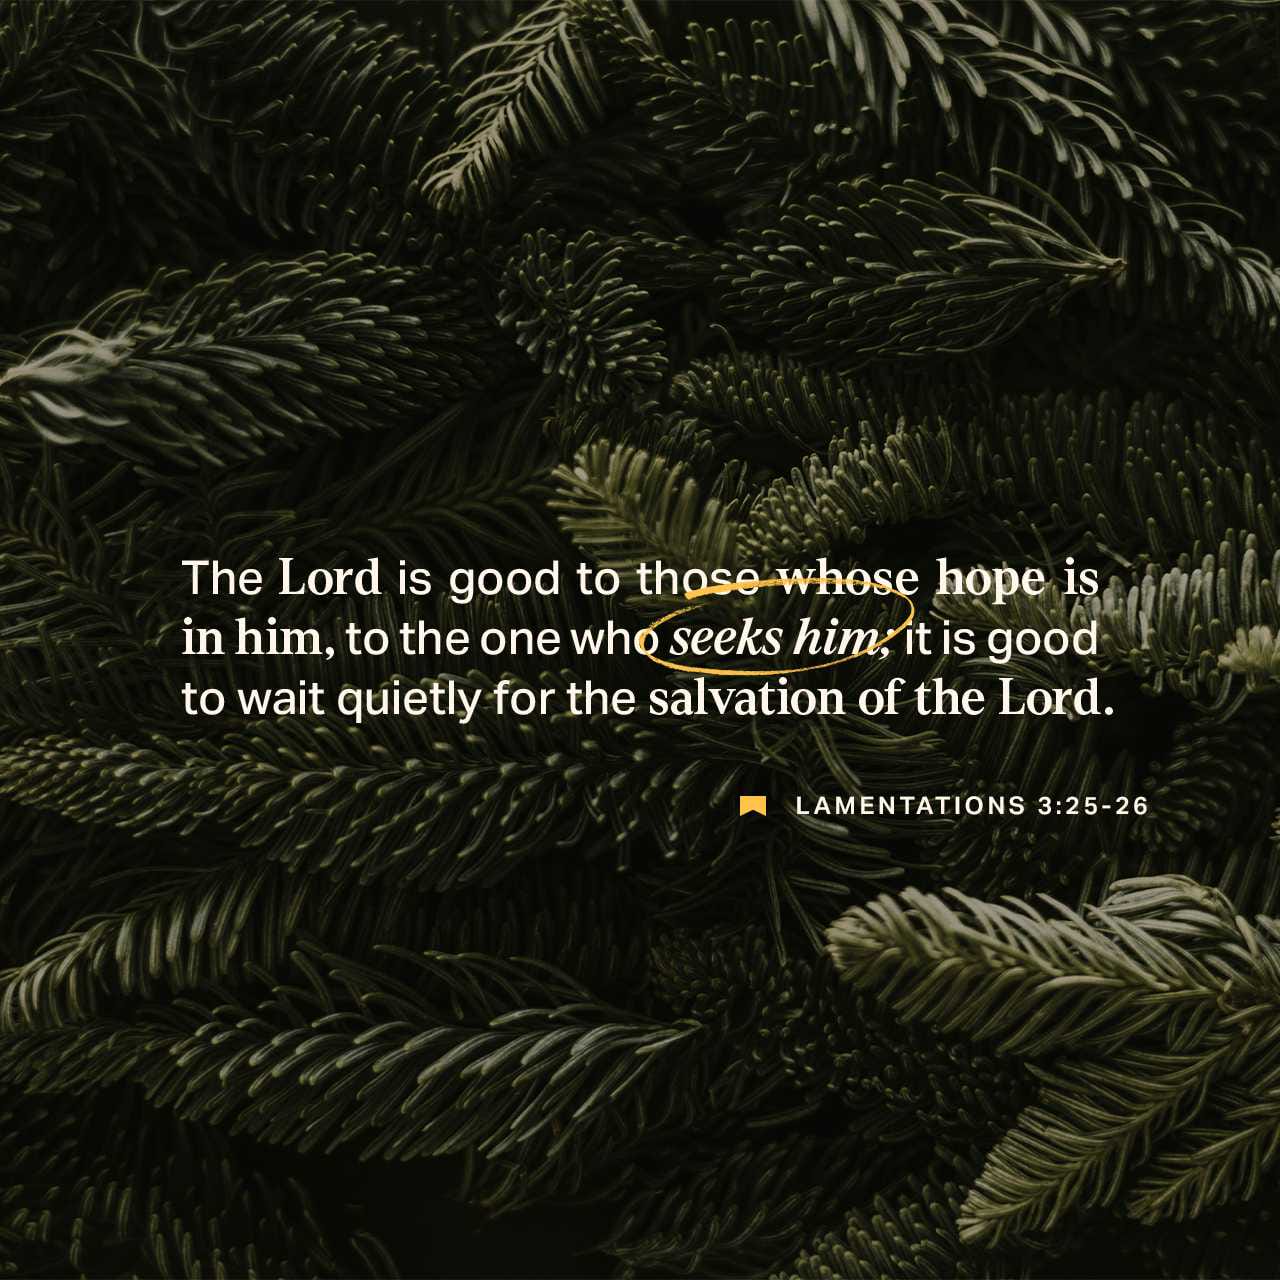 Lamentations 3:25-26 The LORD is good unto them that wait for him,
To the soul that seeketh him.
It is good that a man should both hope and quietly
Wait for the salvation of the LORD. | King James Version (KJV) | Download The Bible App Now